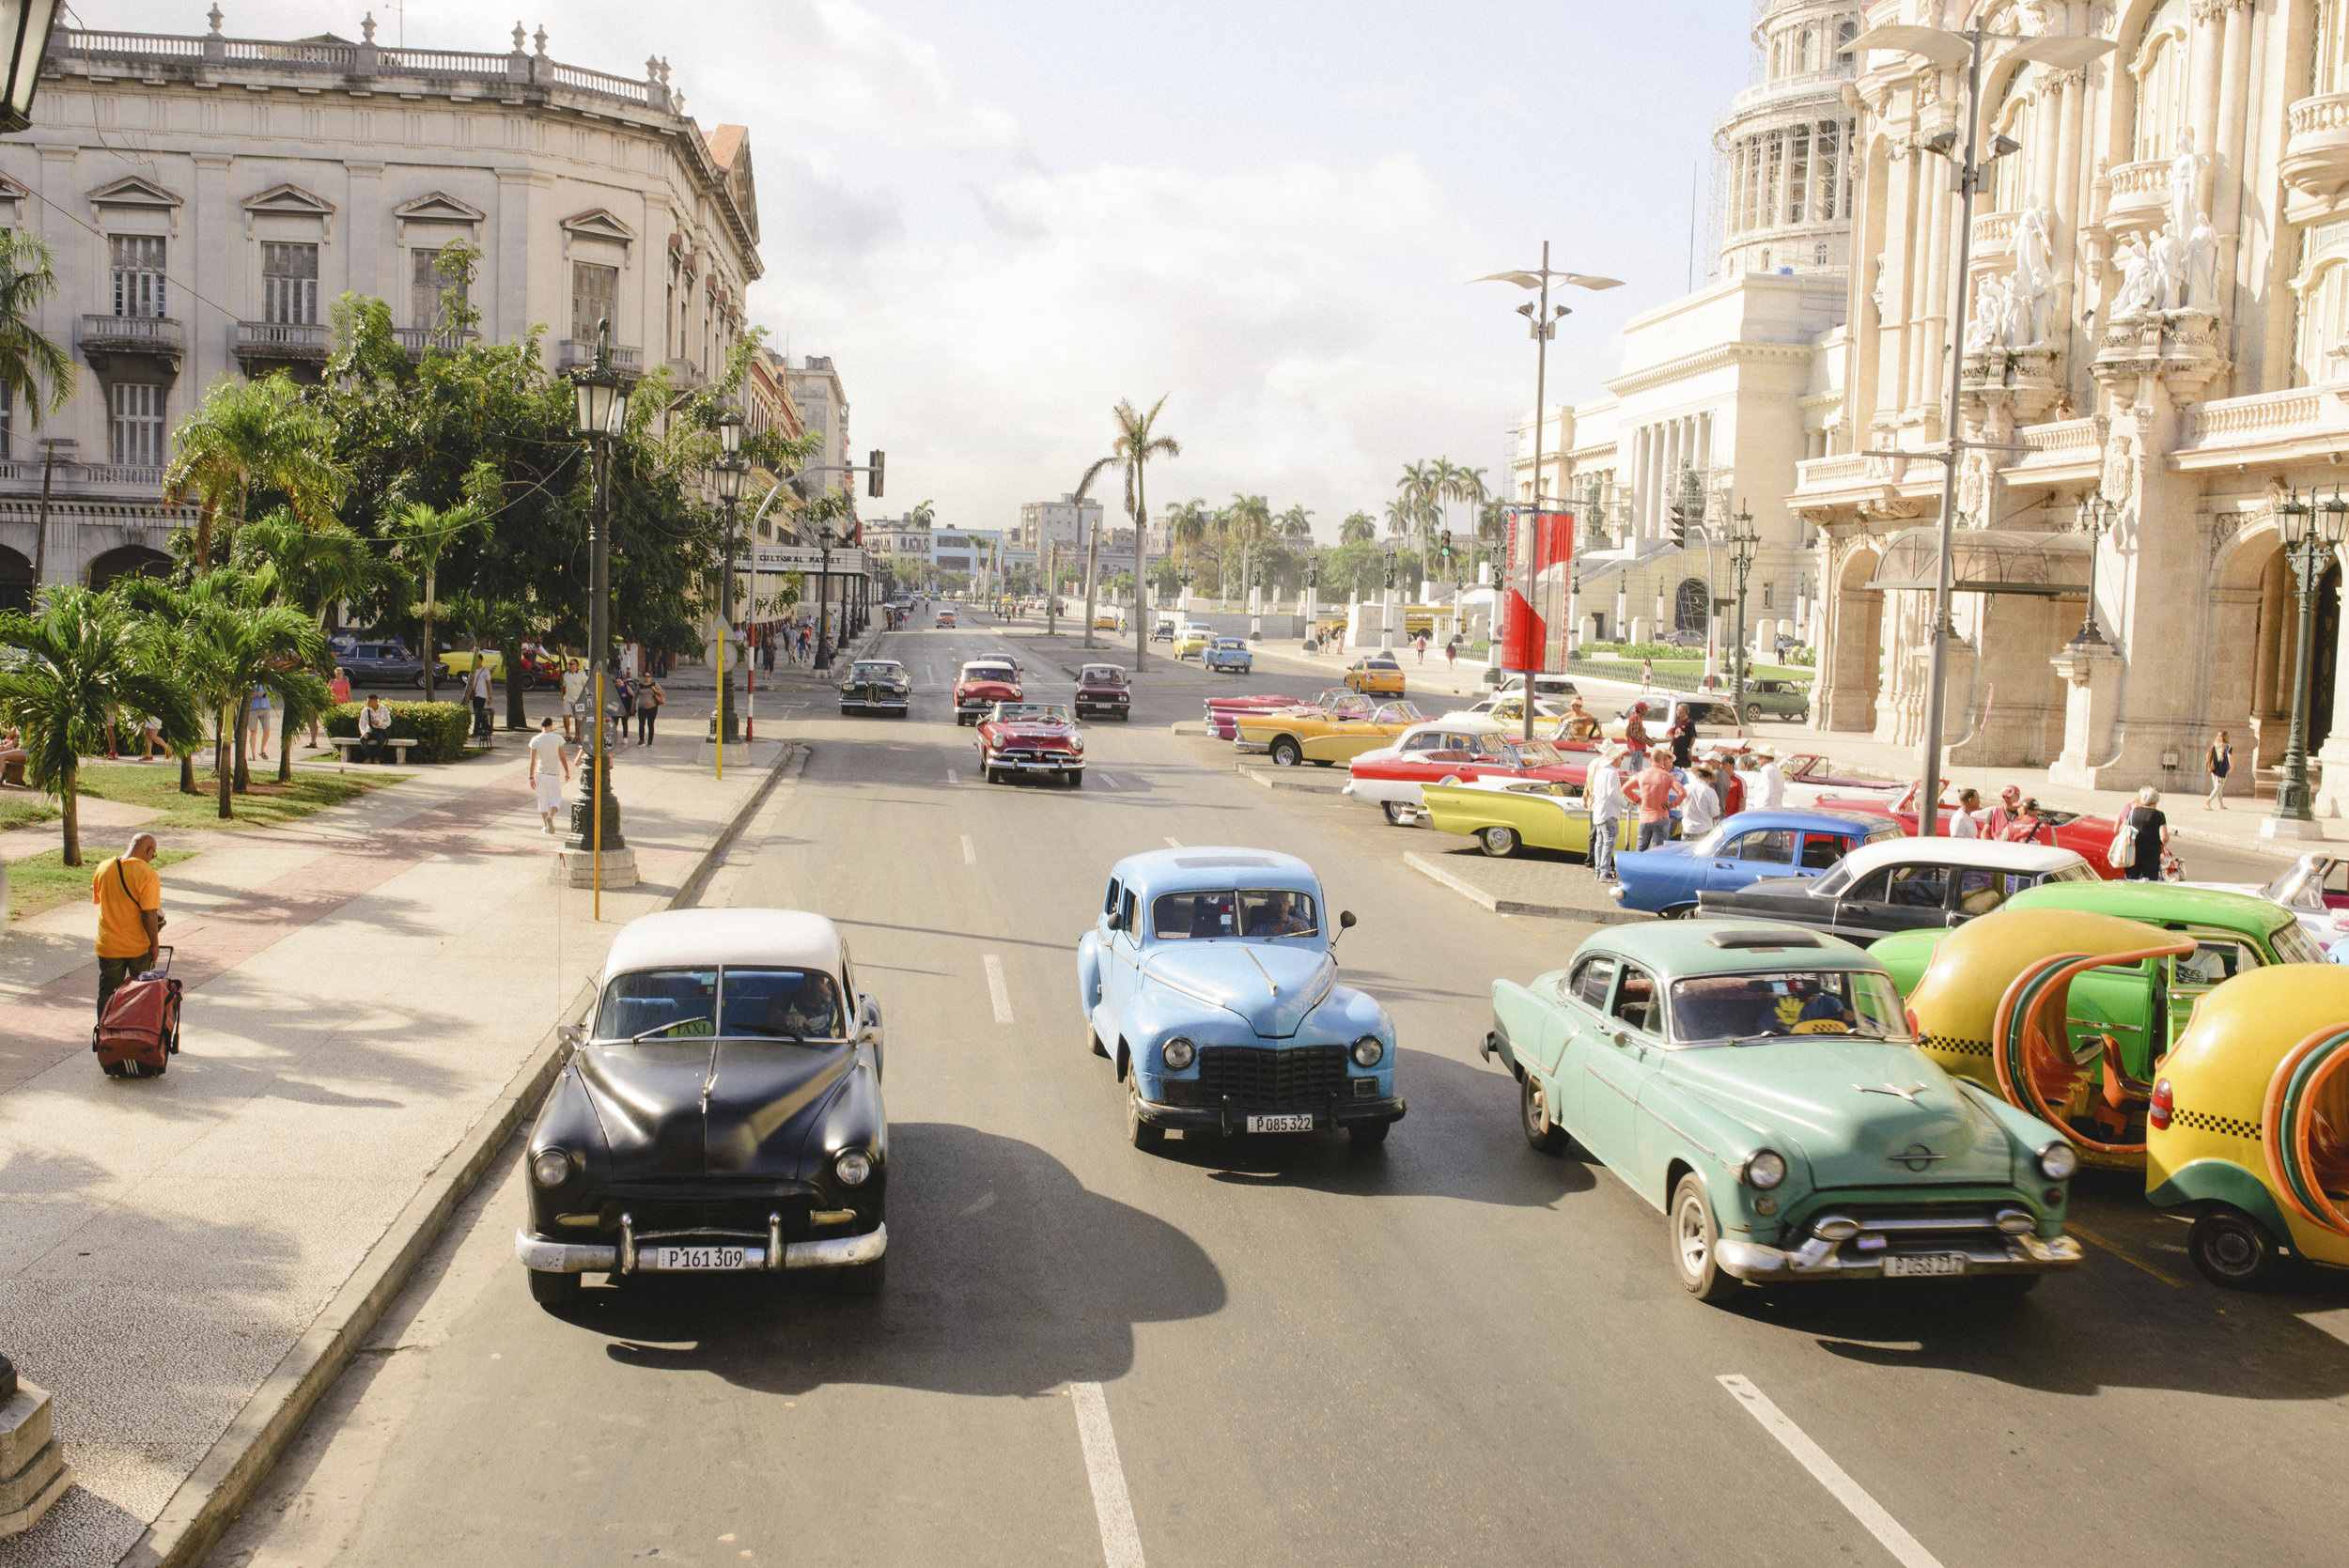 travelling to cuba april 2023